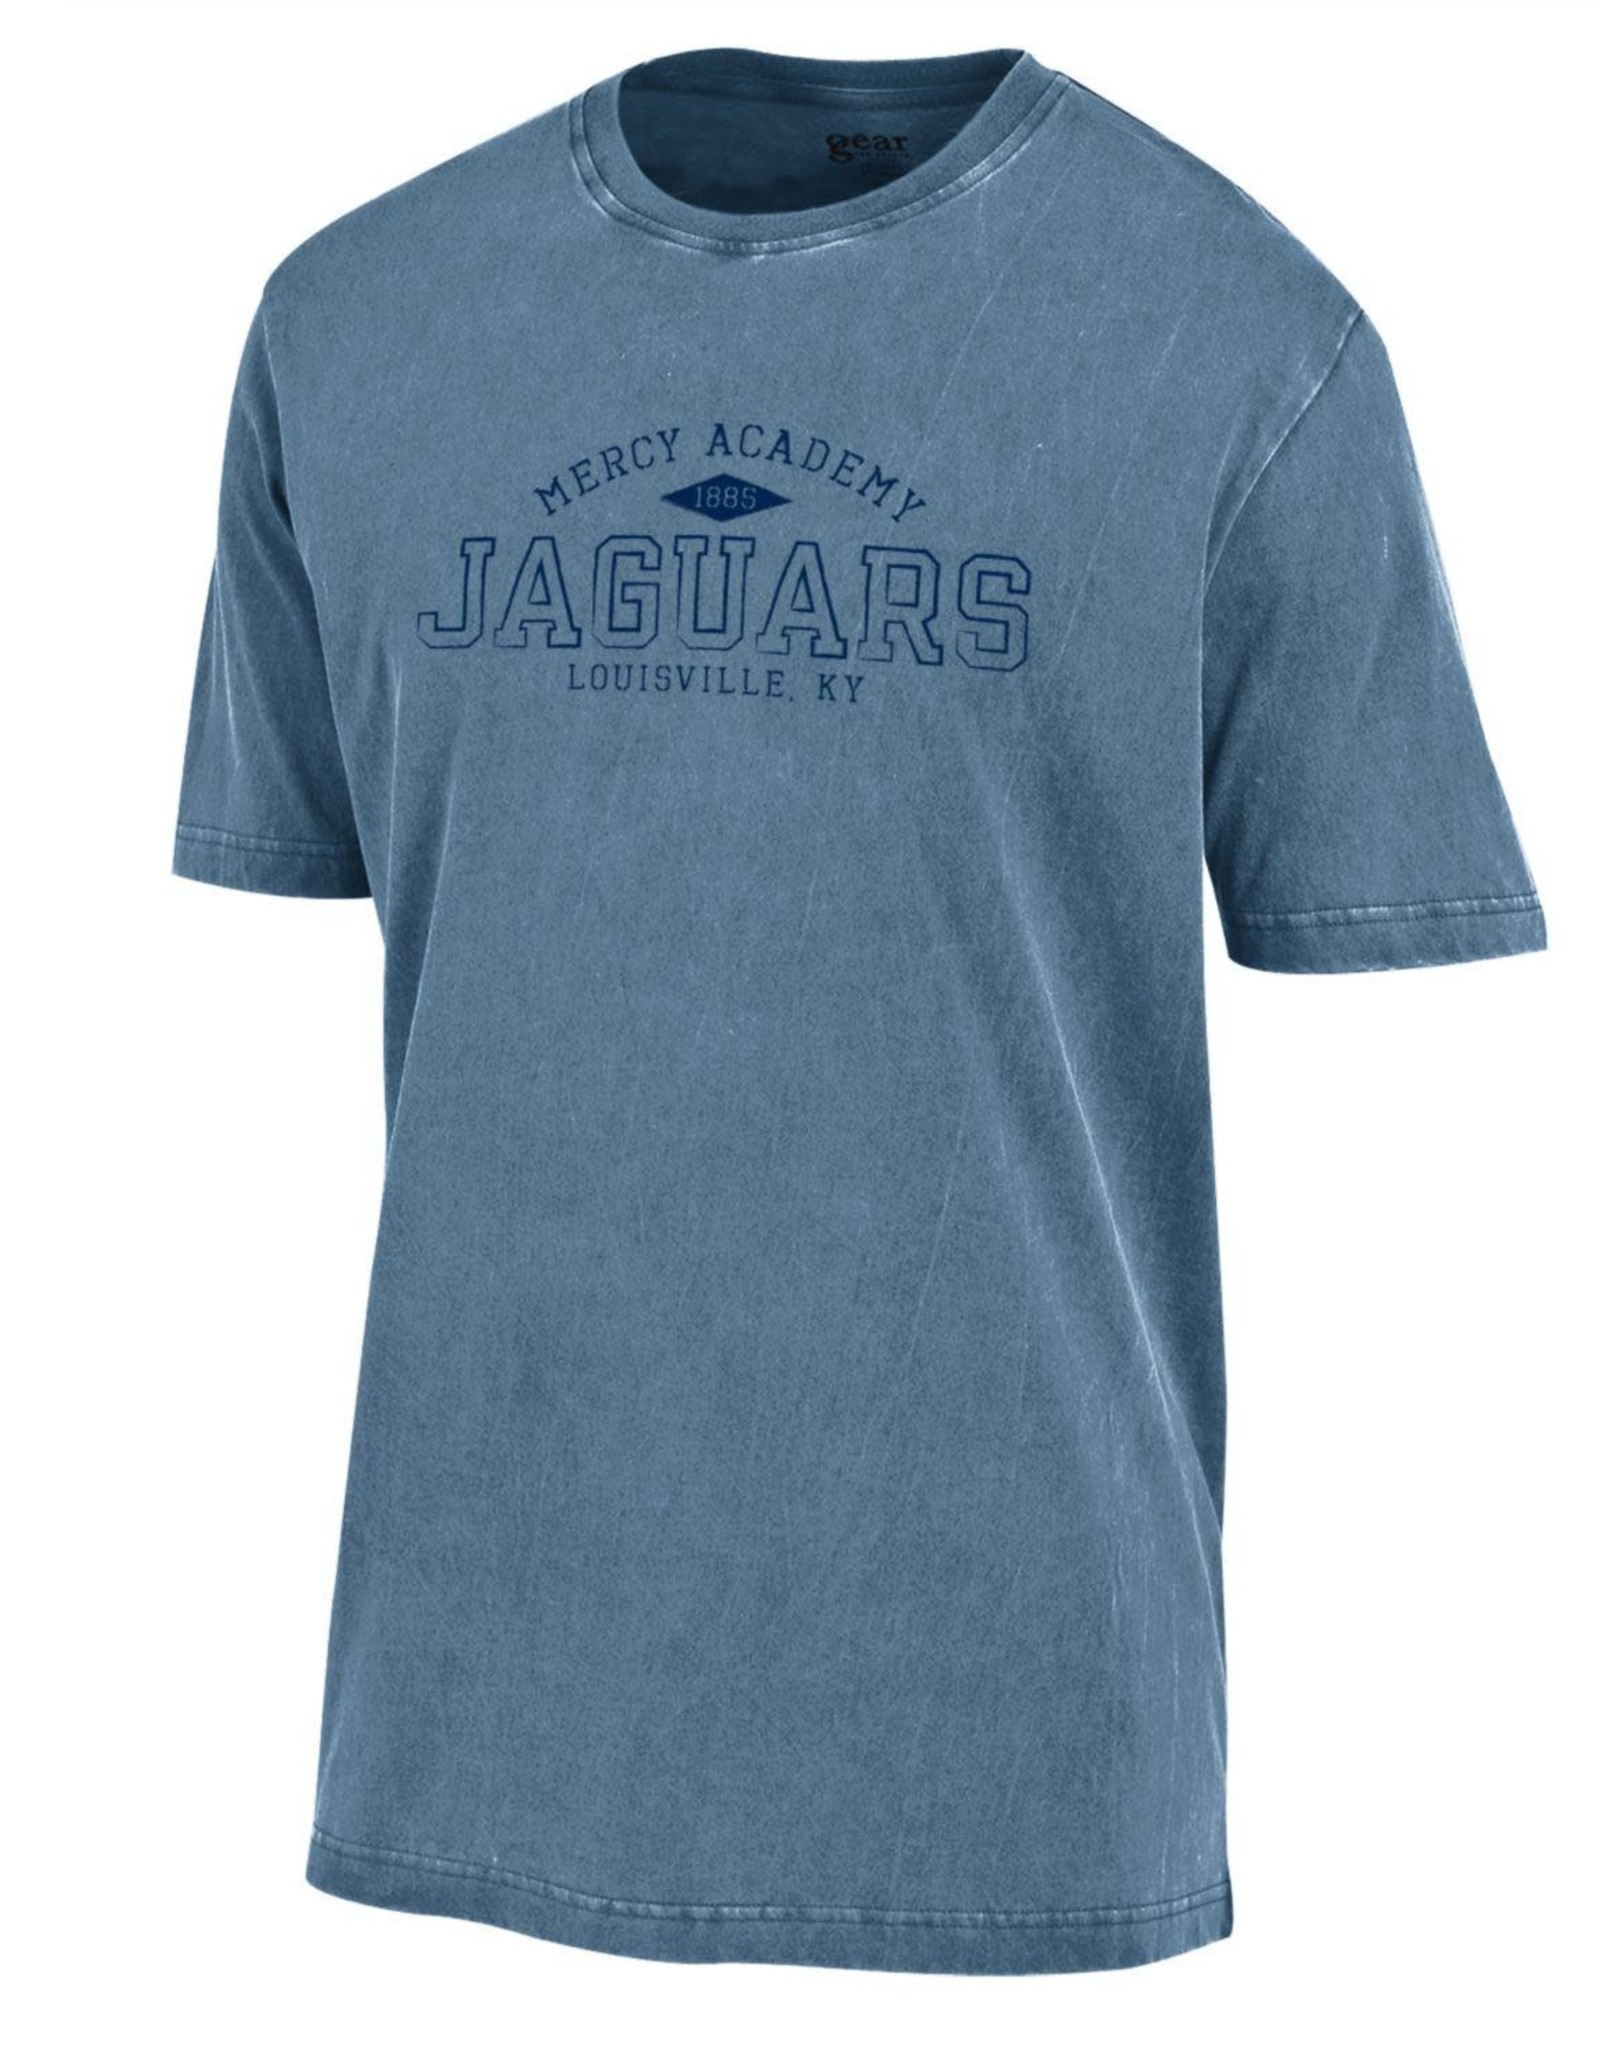 Gear for Sports Mercy Academy Jaguars 1885 Faded Blue Outta Town Tee